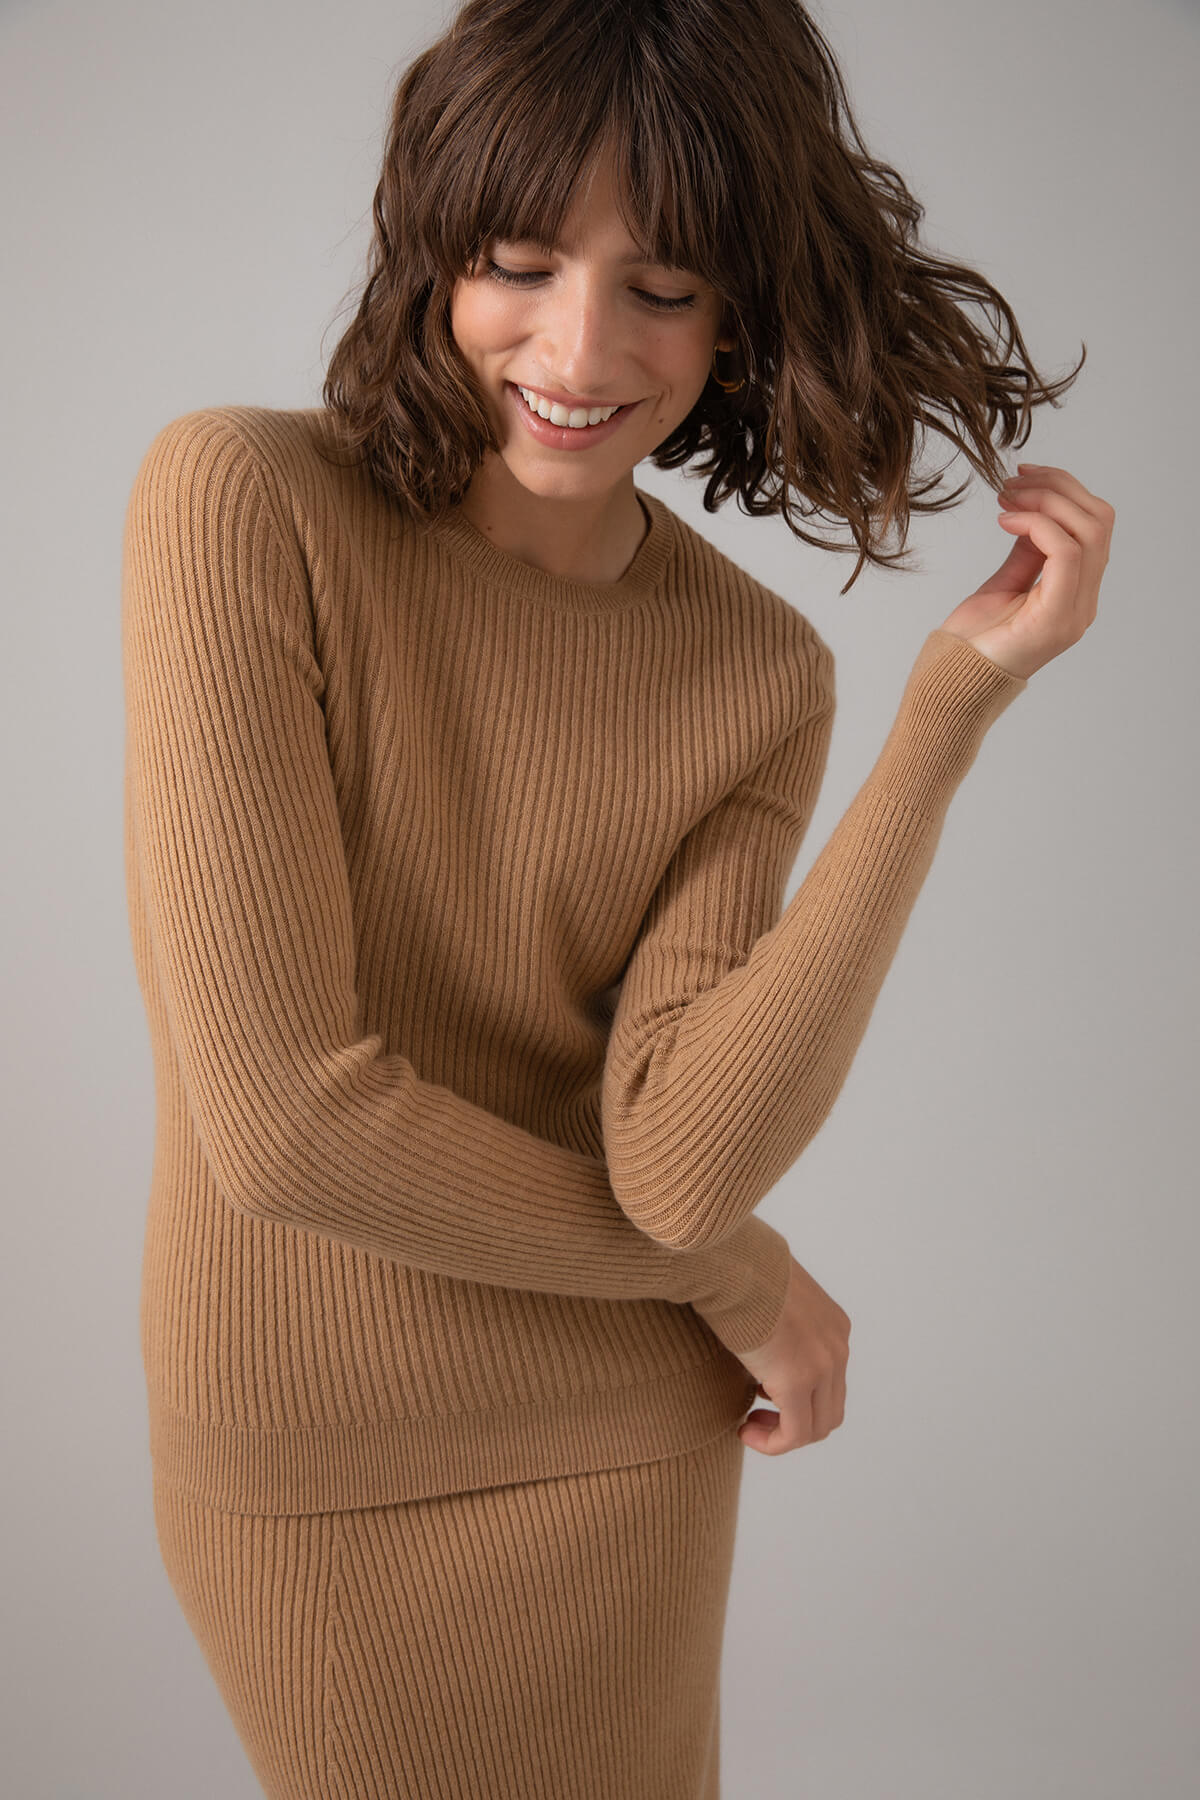 Johnstons of Elgin Women's Skinny Rib Cashmere Sweater in Camel on a grey background KBI00928HB4315